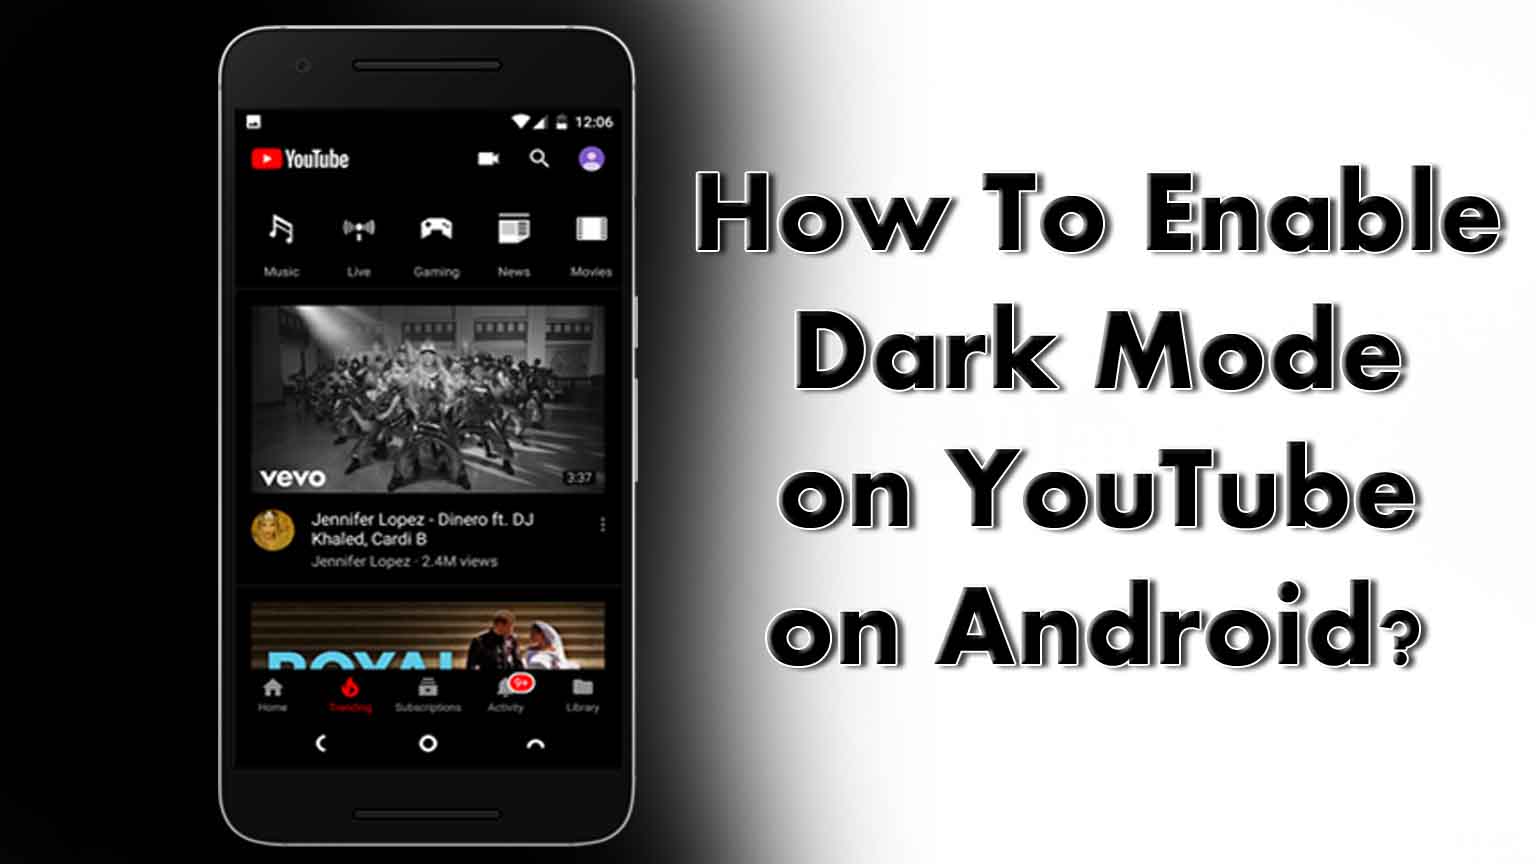 How-To-Enable-Dark-Mode-on-YouTube-on-Android